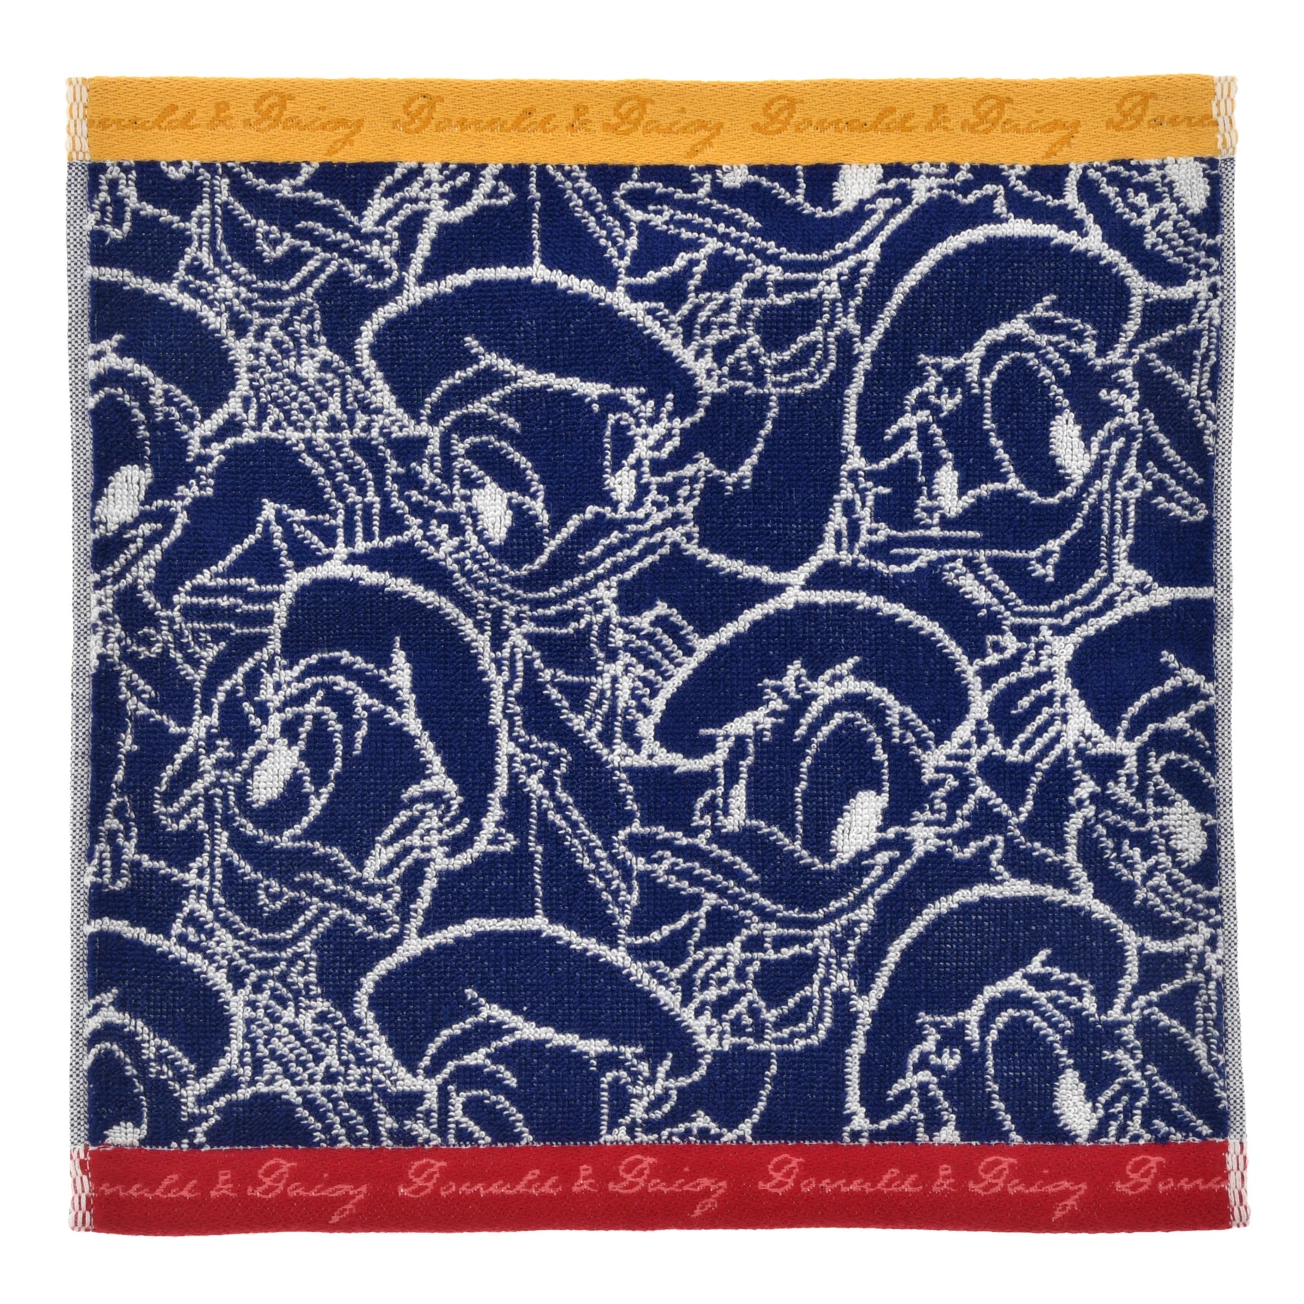 SDJ - DONALD DUCK IT'S MY STYLE Collection - Towel